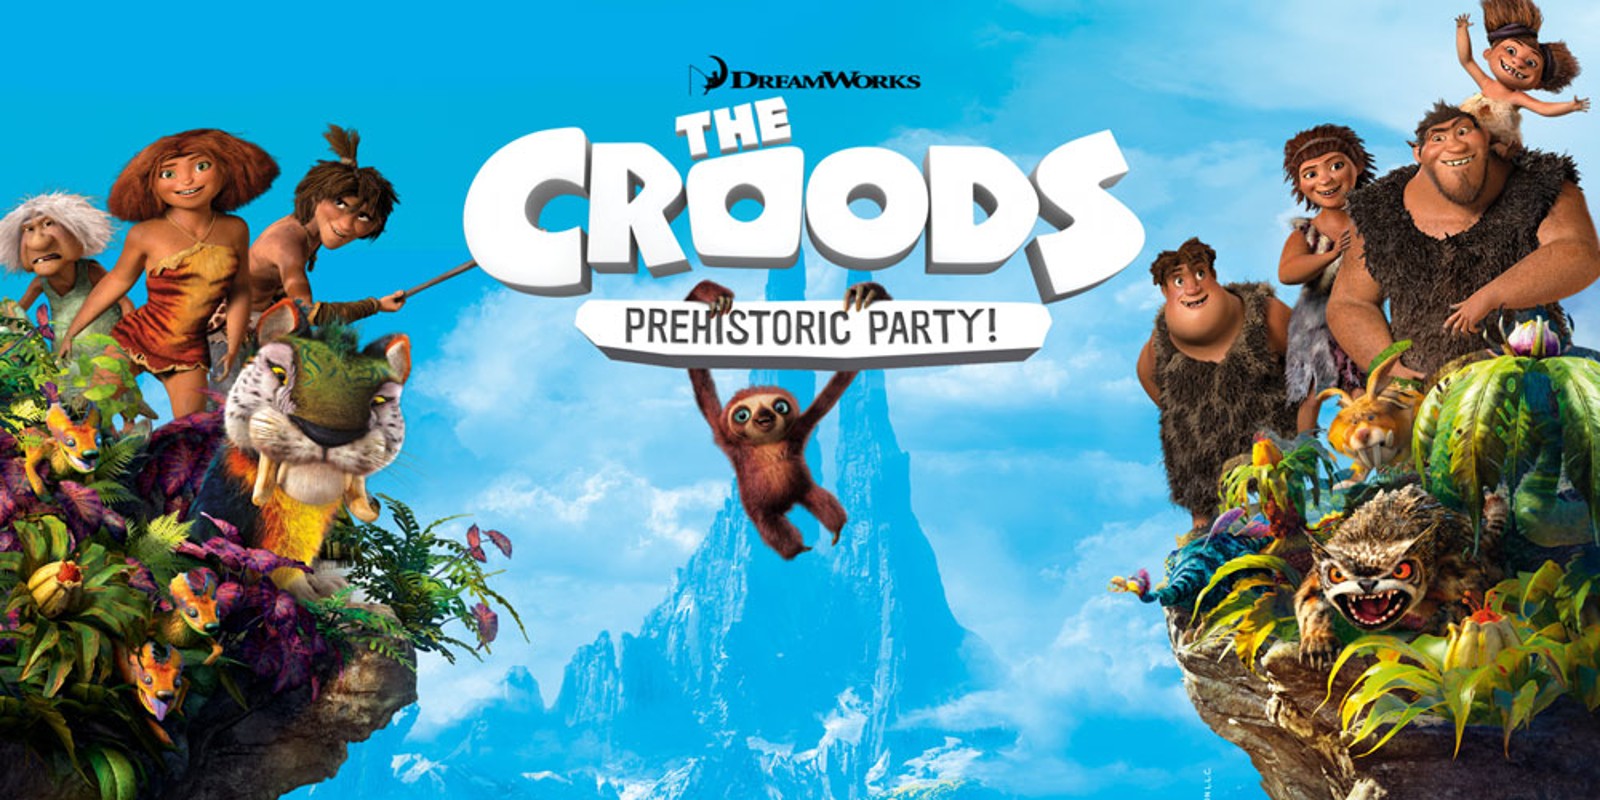 The croods game download